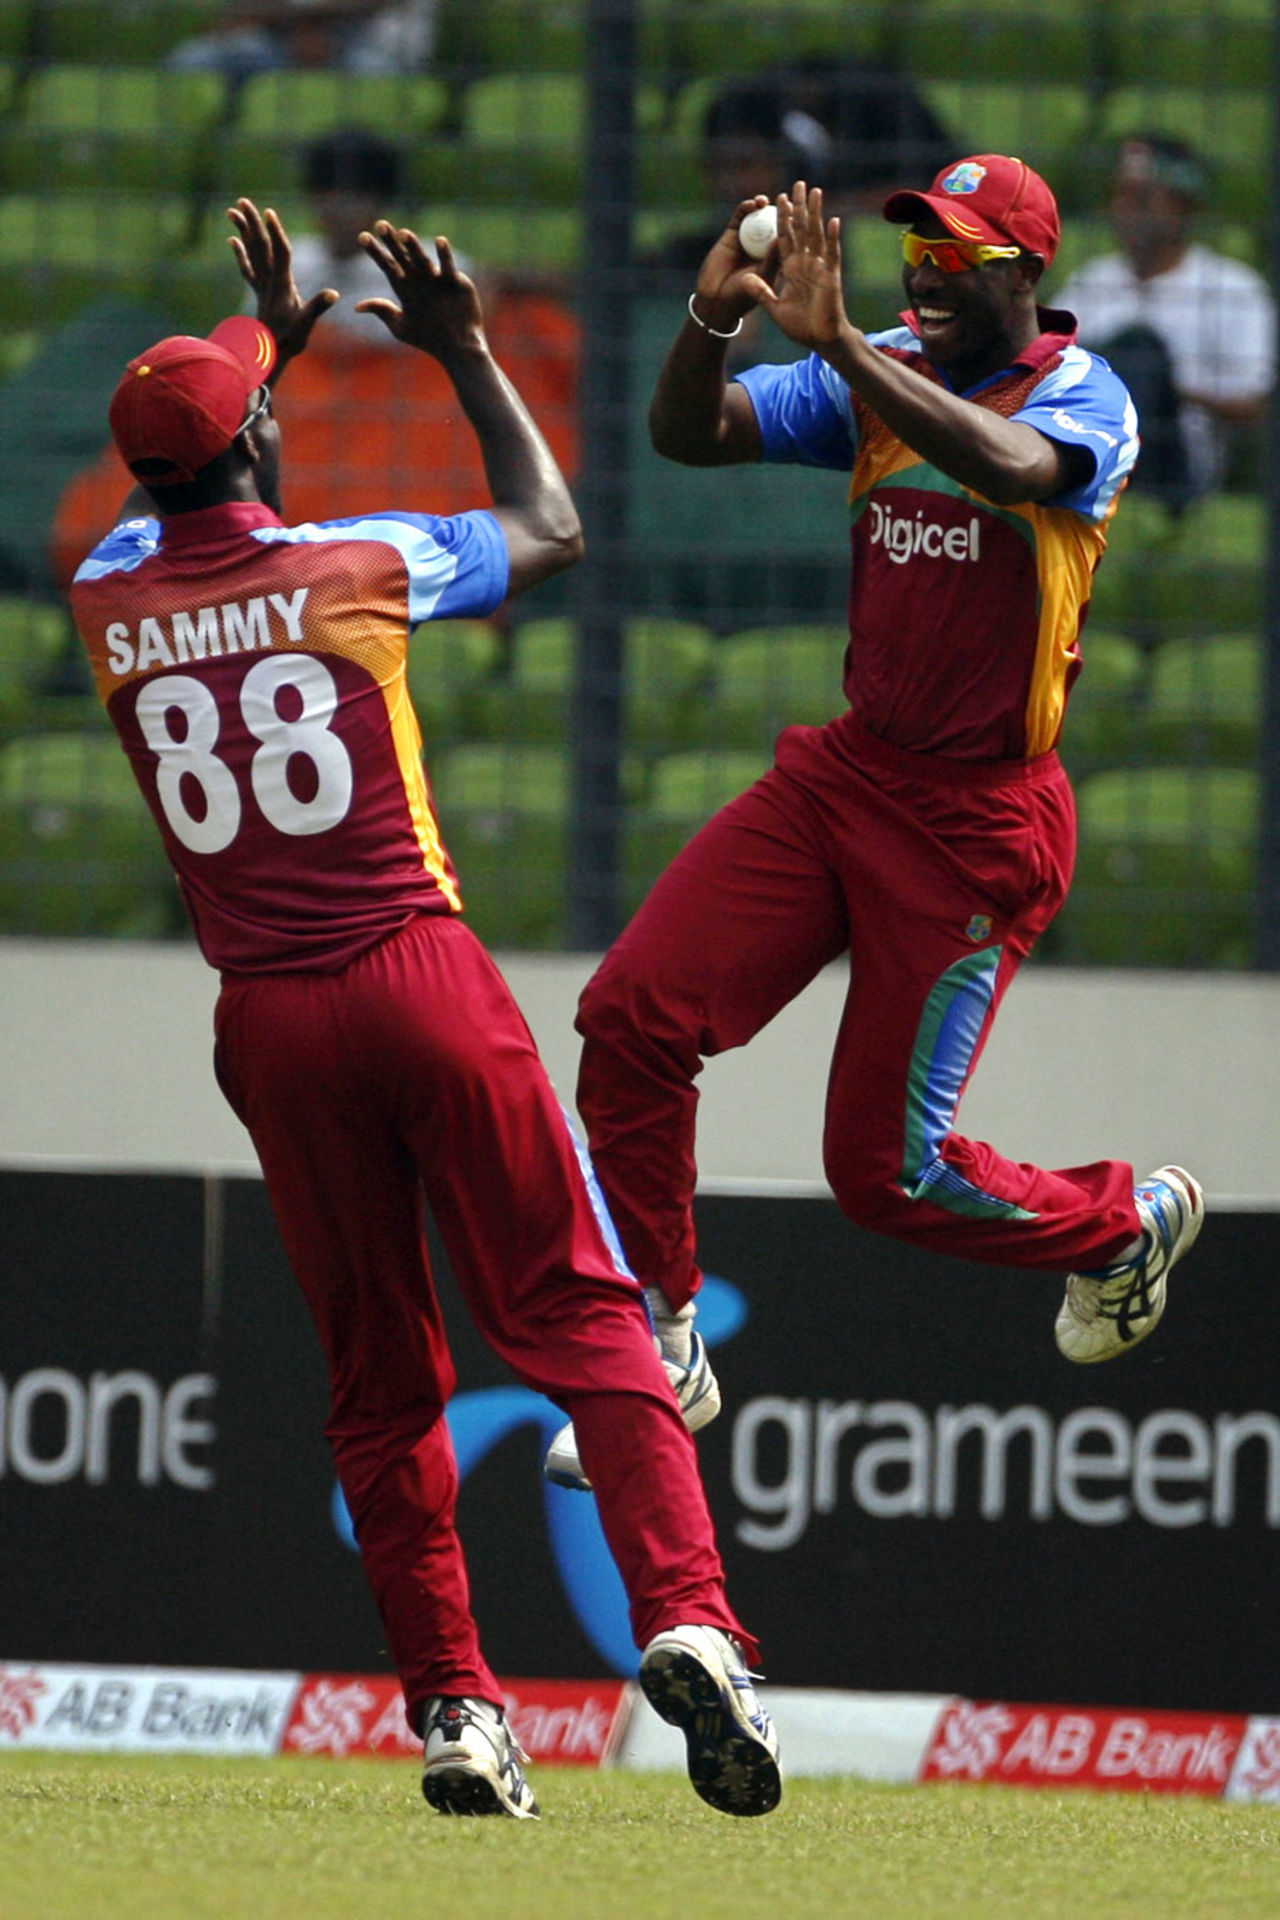 Darren Sammy and Andre Russell celebrate a wicket, Bangladesh v West Indies, 2nd ODI, Mirpur, October 15, 2011
